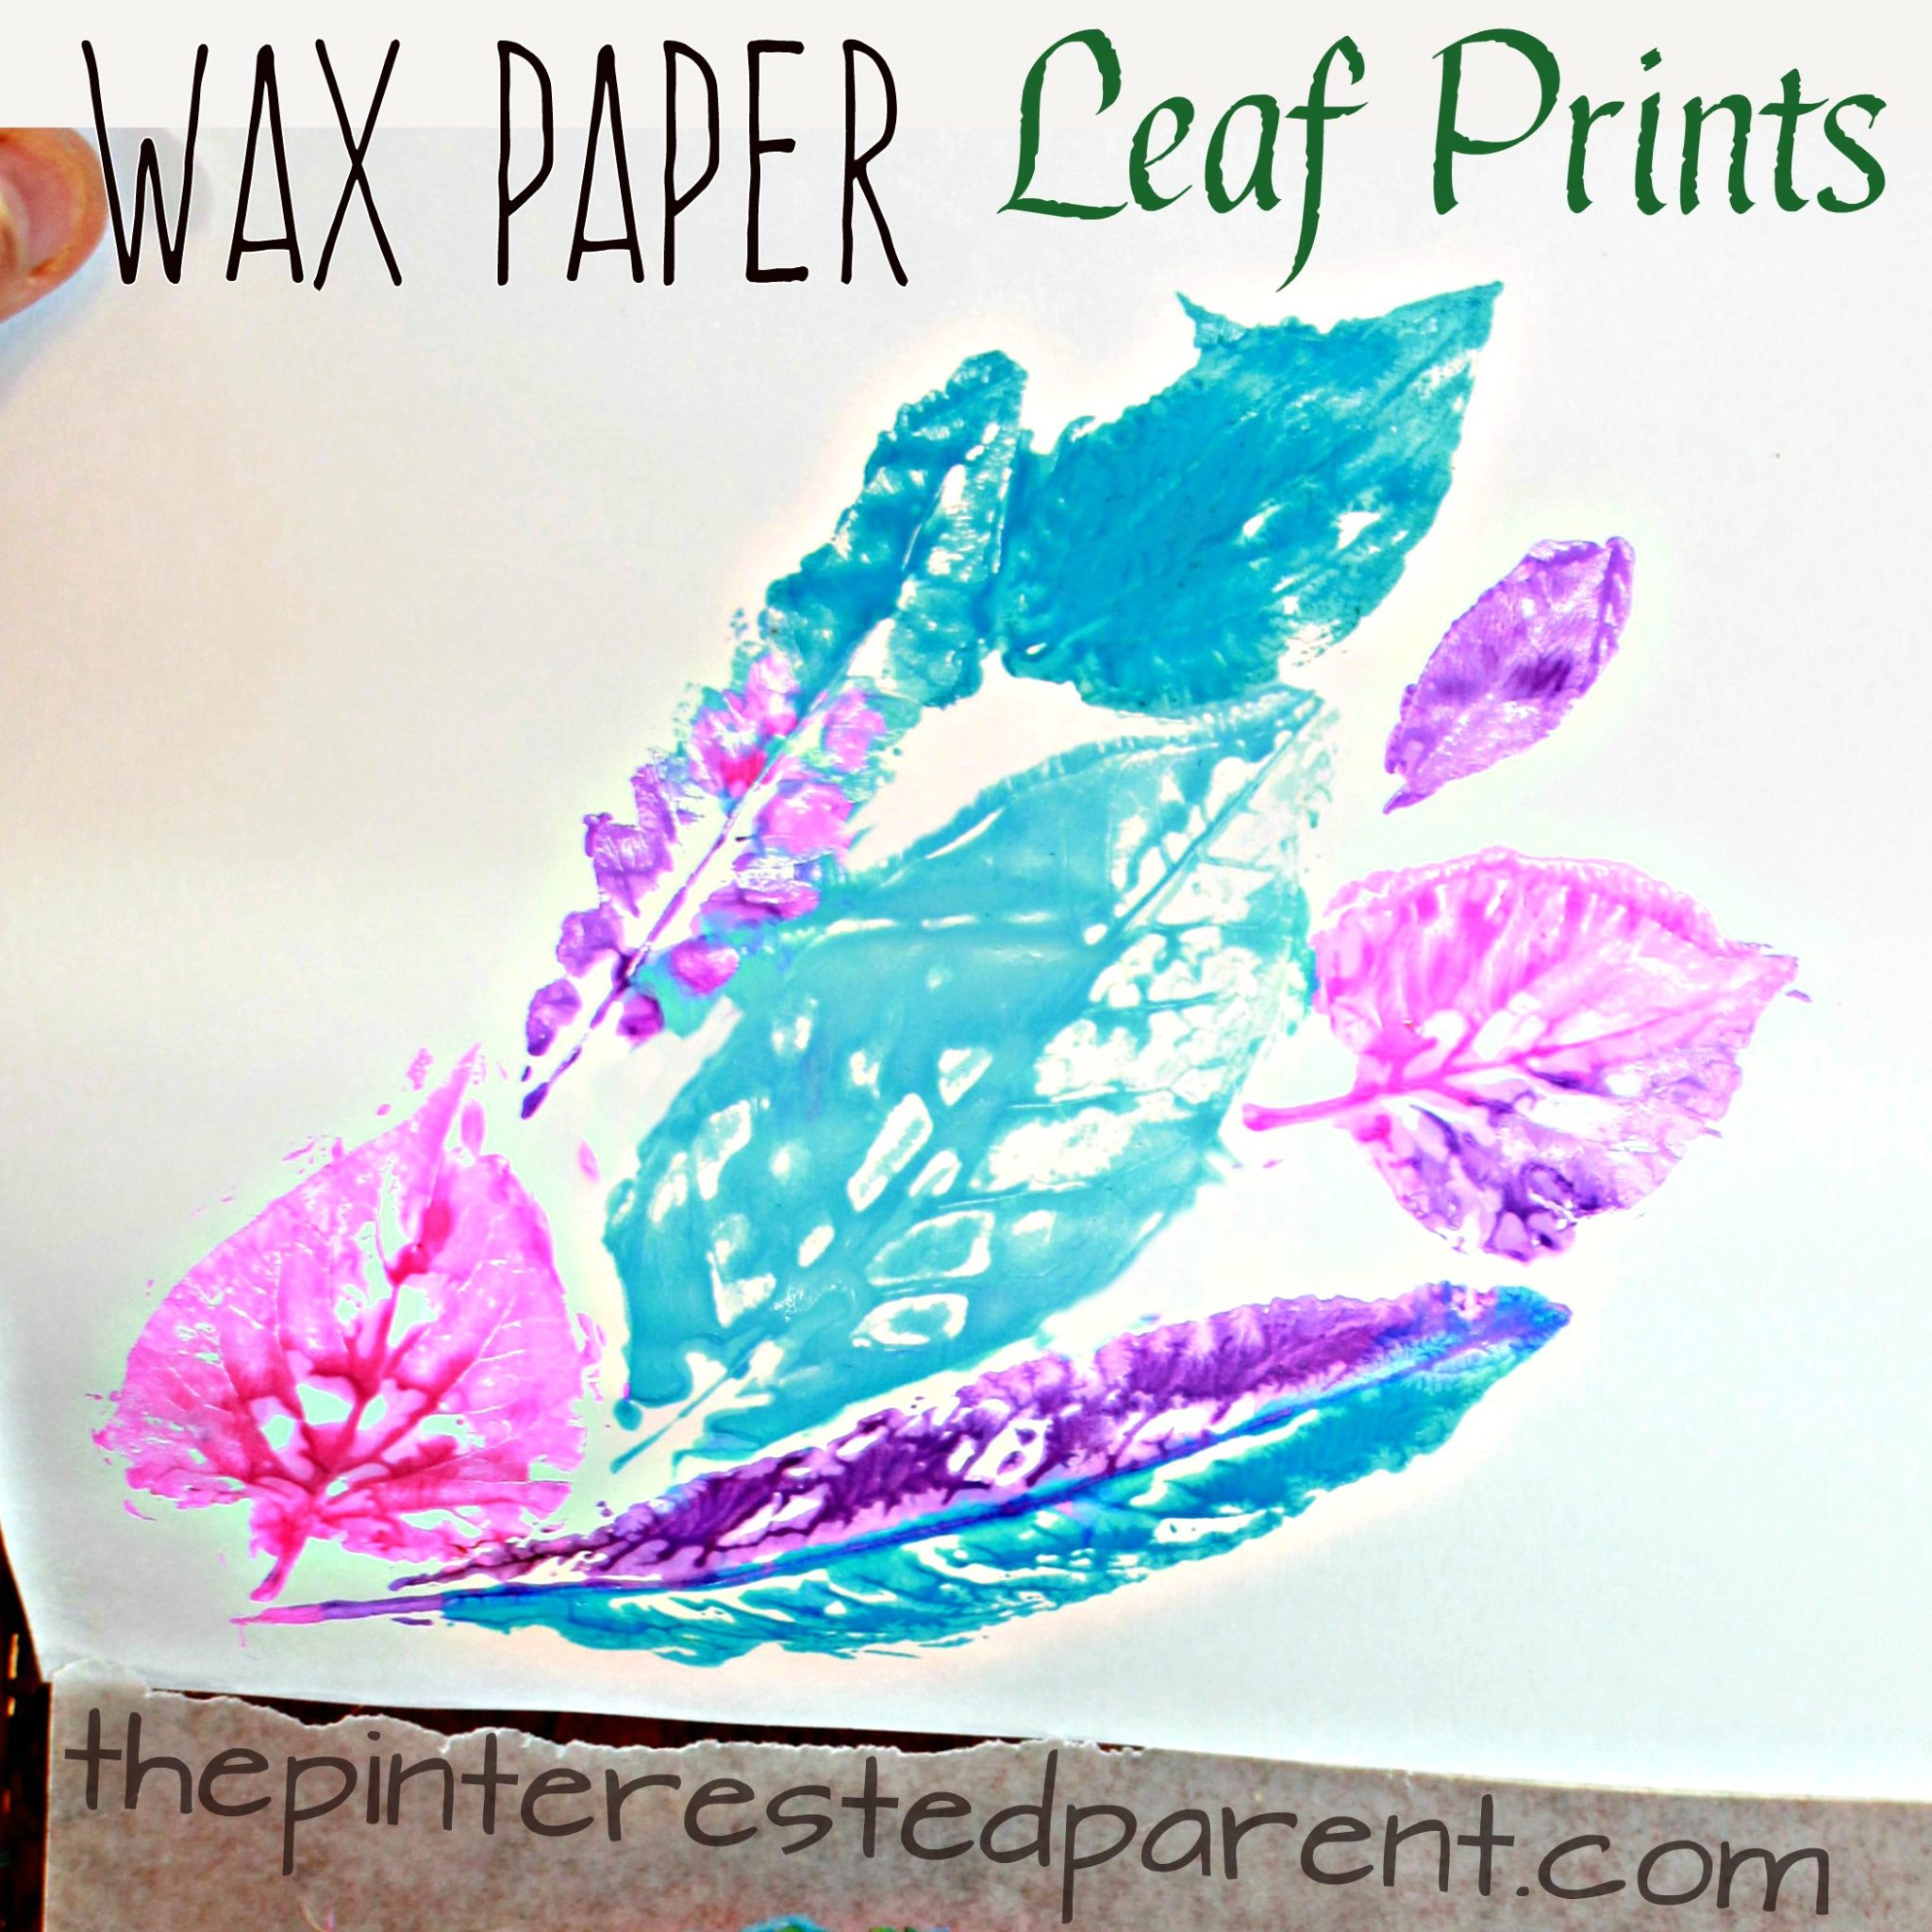 Leaf Nature prints on wax paper - printmaking ideas for kids. spring & summer arts & crafts projects